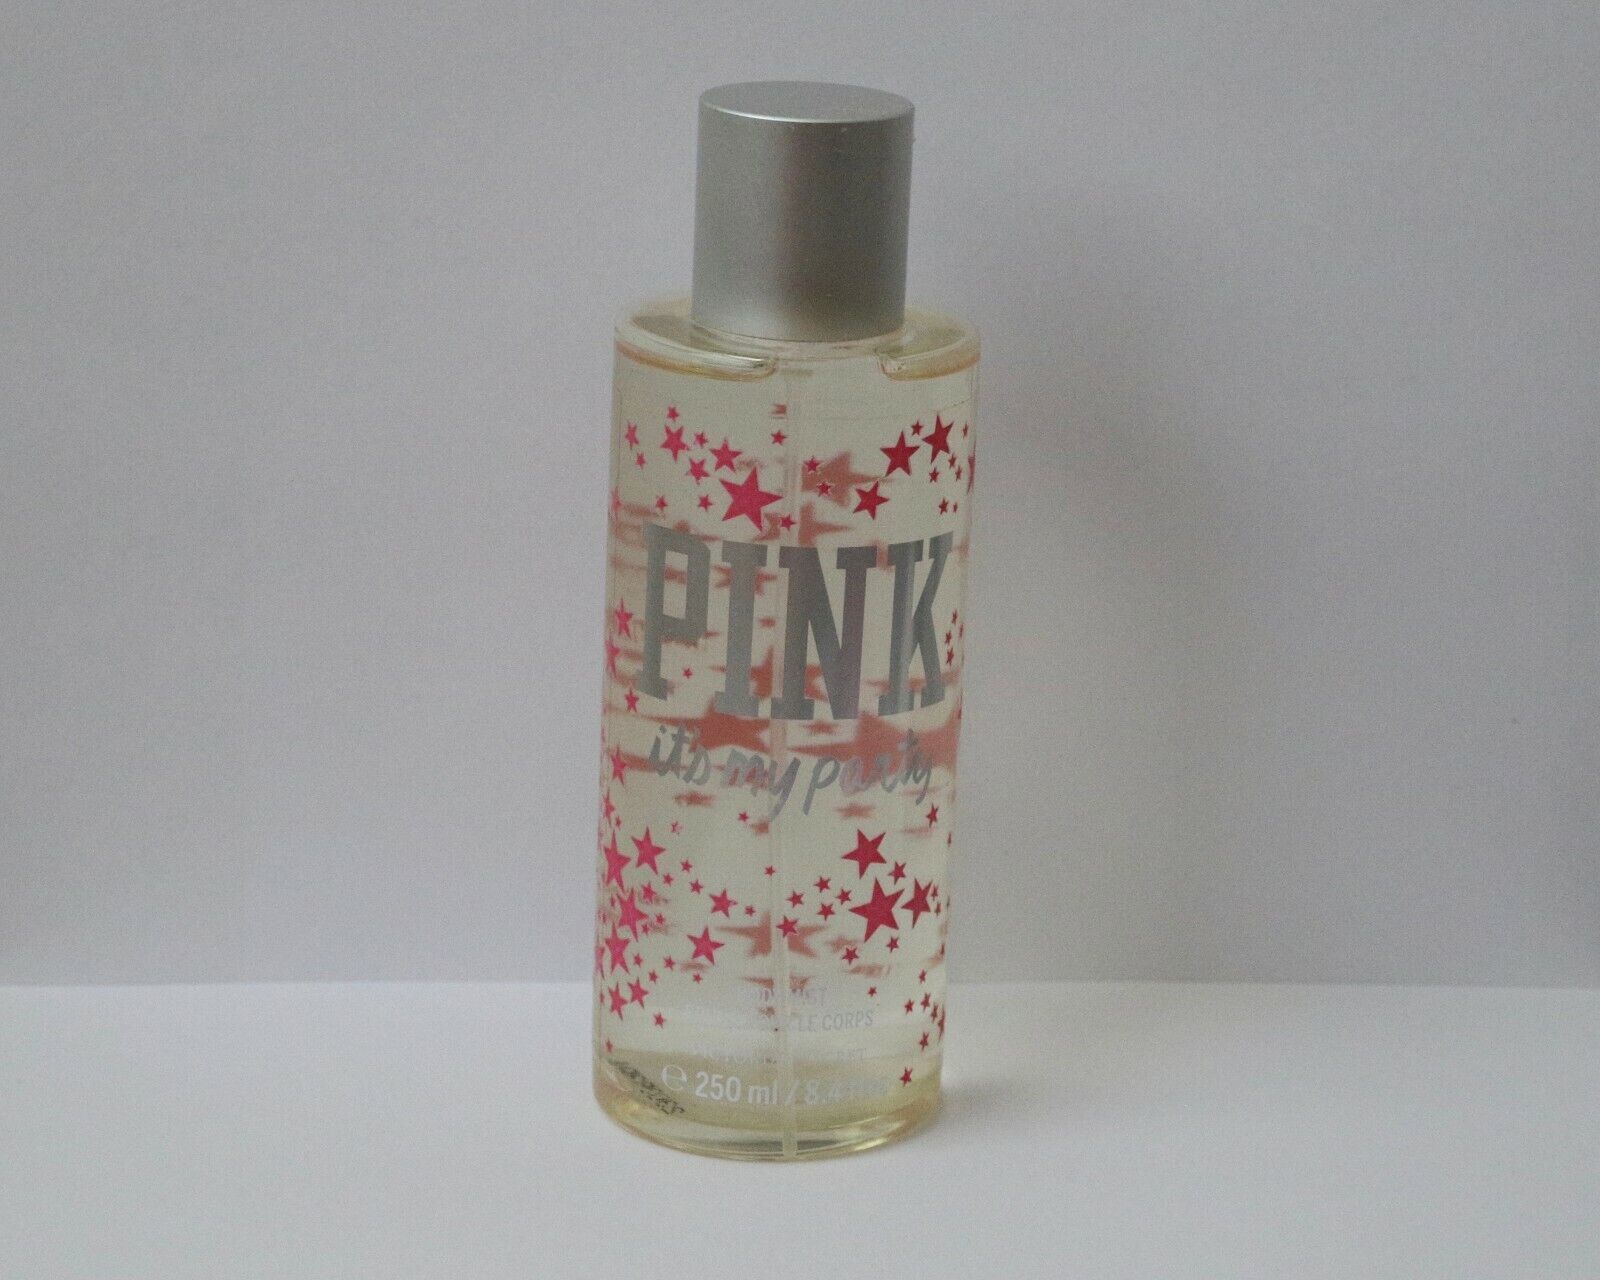 Primary image for Victoria's Secret PINK It`s My Party Body Mist Fragrance Full Size 8.4 oz 250 ml